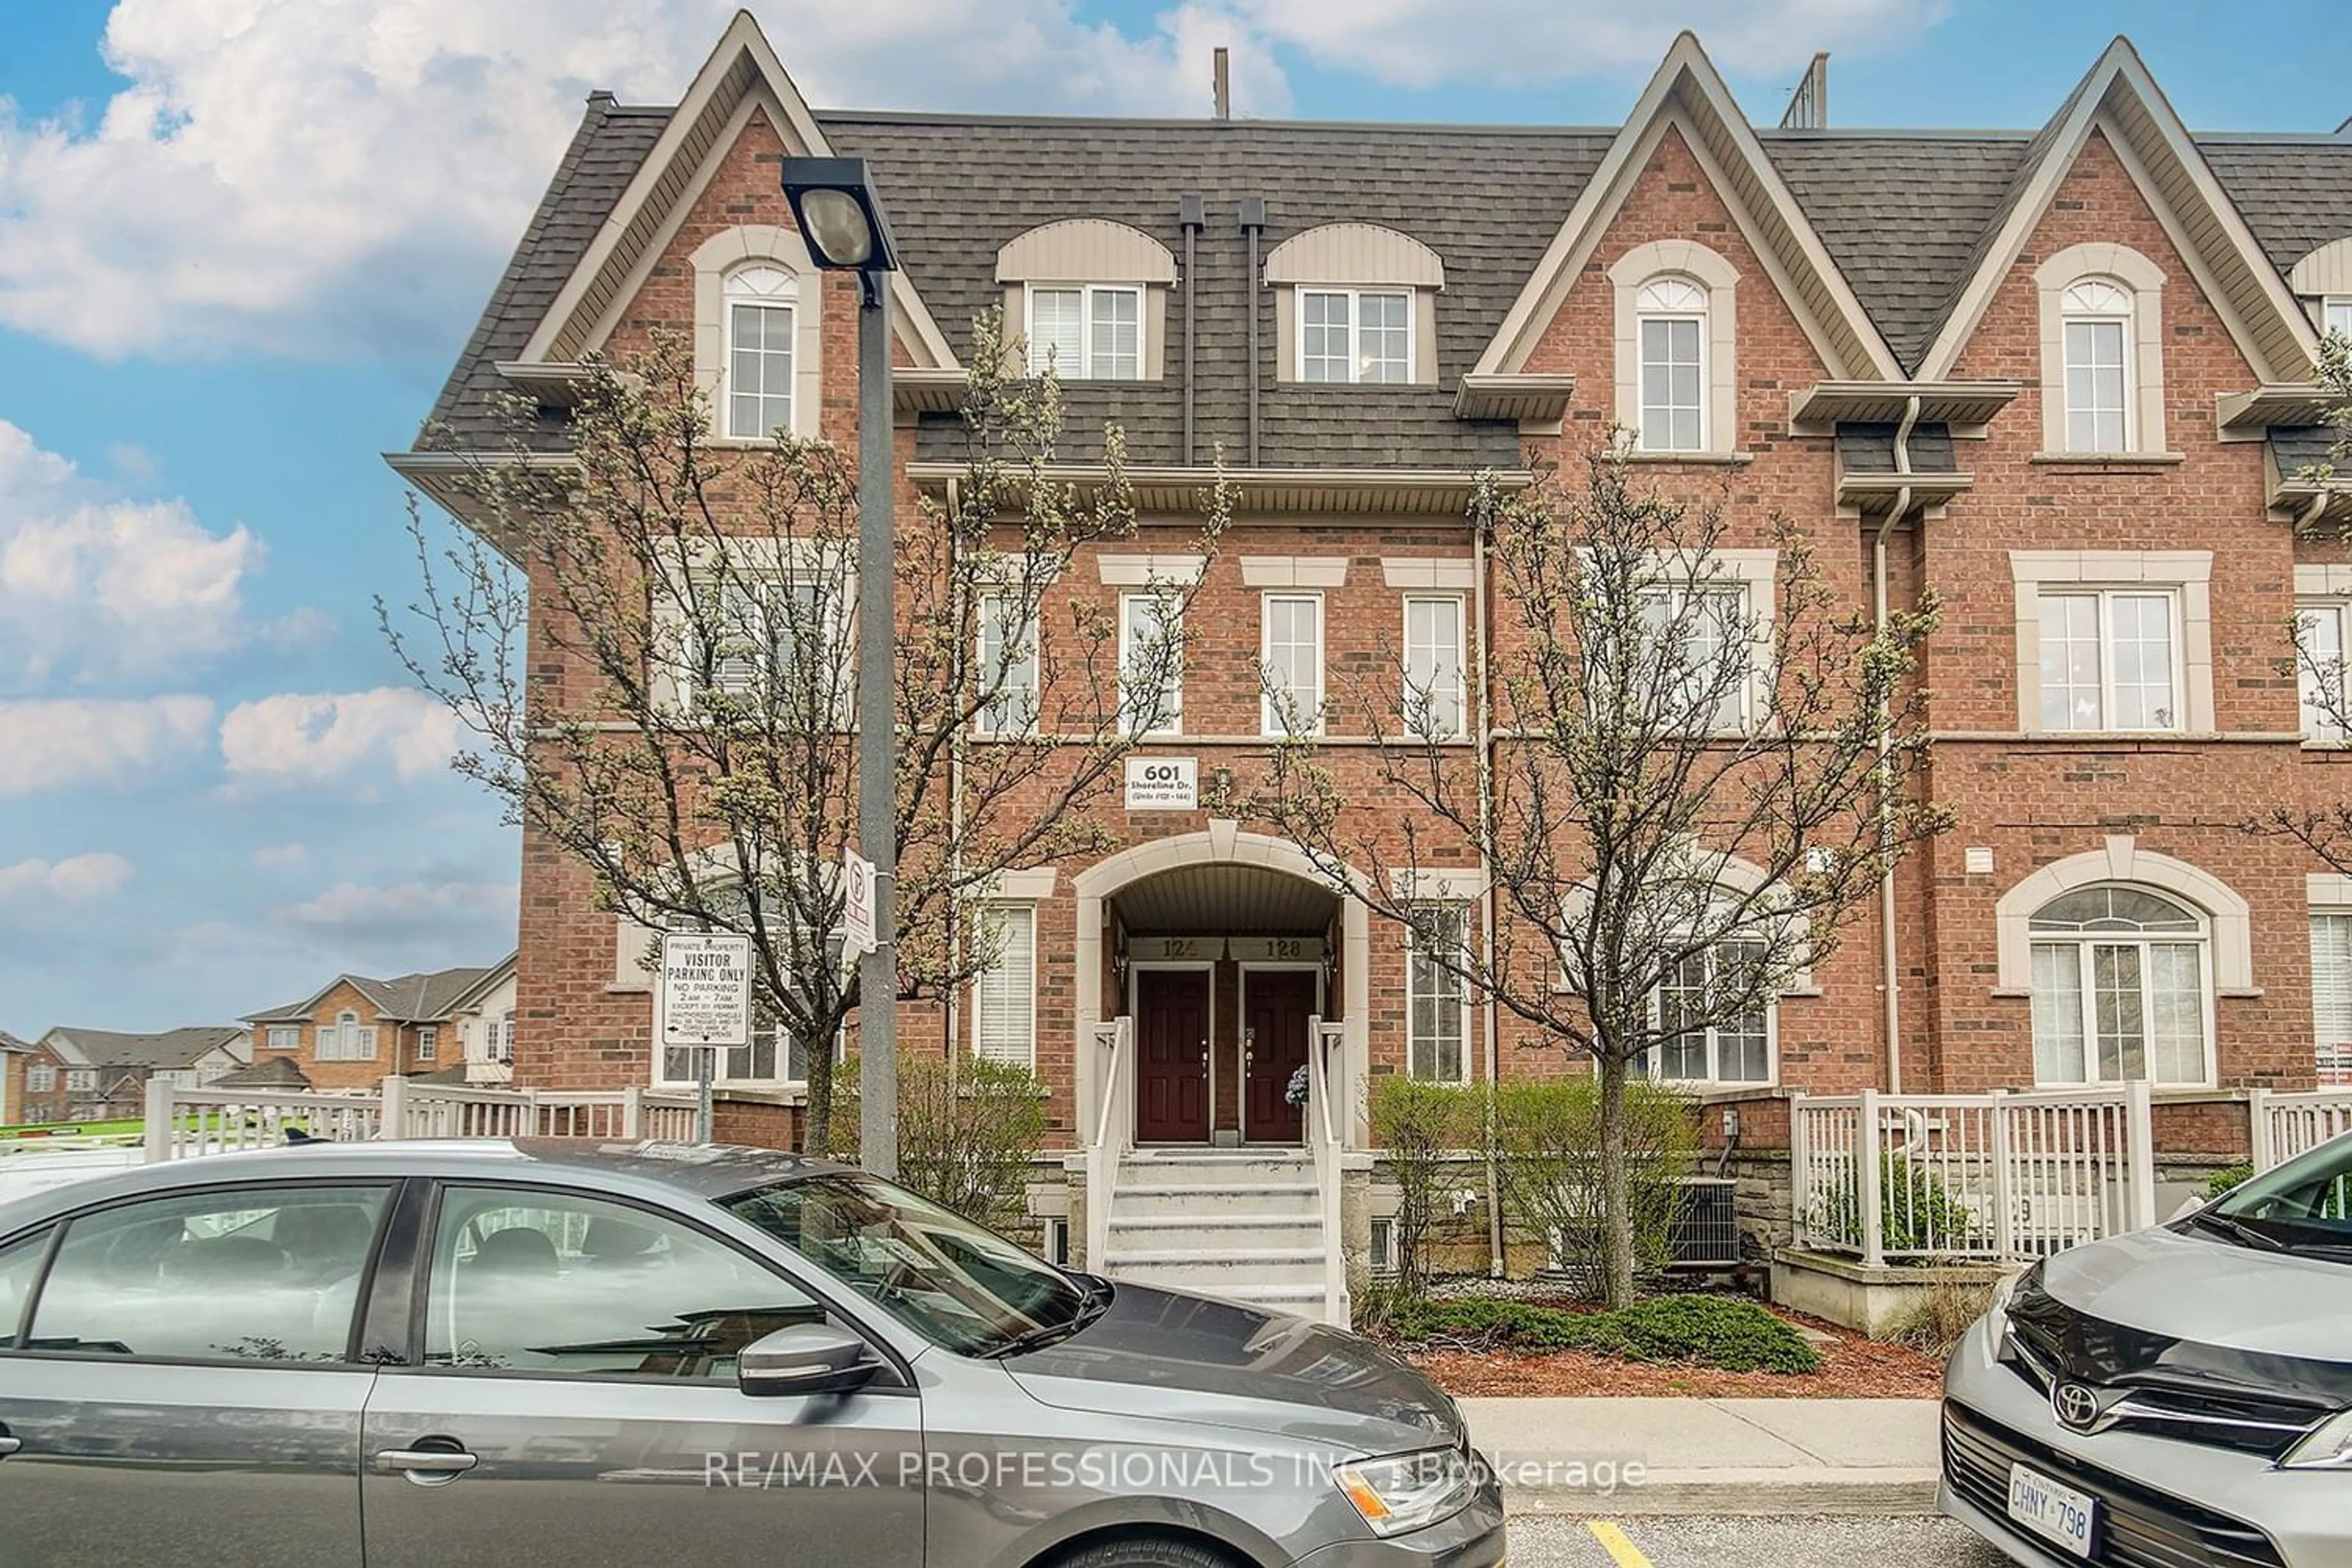 Home with brick exterior material for 601 Shoreline Dr #127, Mississauga Ontario L5B 4K3